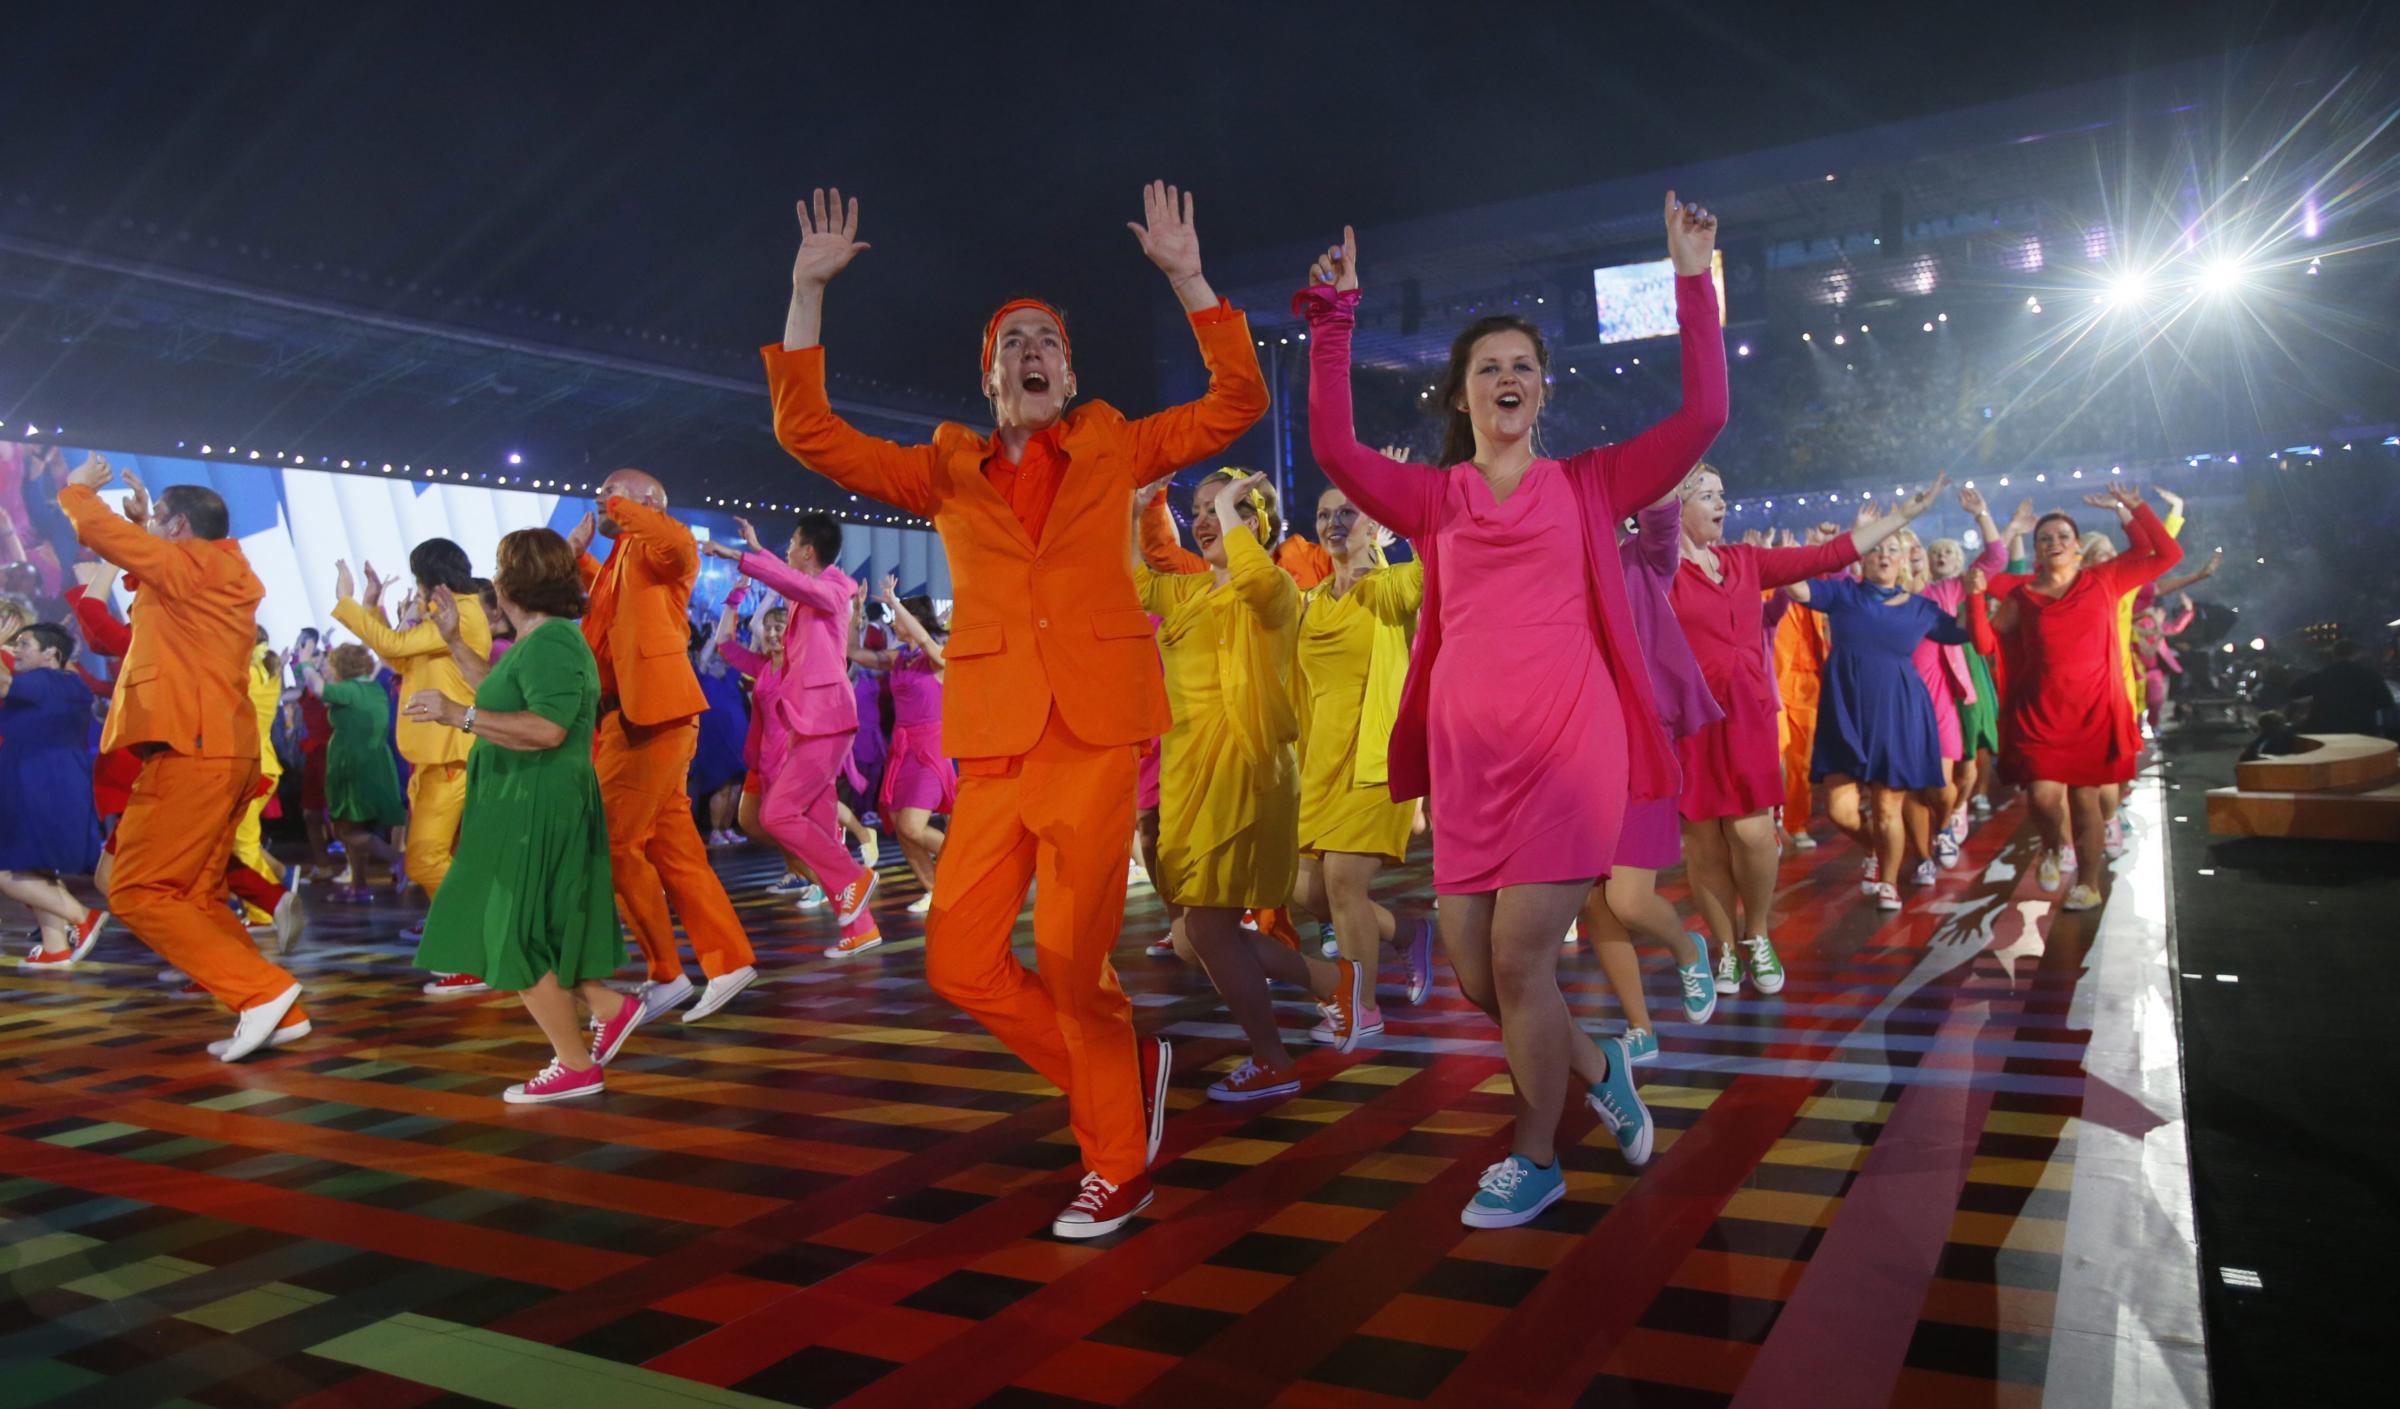 Glasgow 2014 Commonwealth games opening ceremony, Celtic Park, Glasgow. Photograph by Colin Mearns.